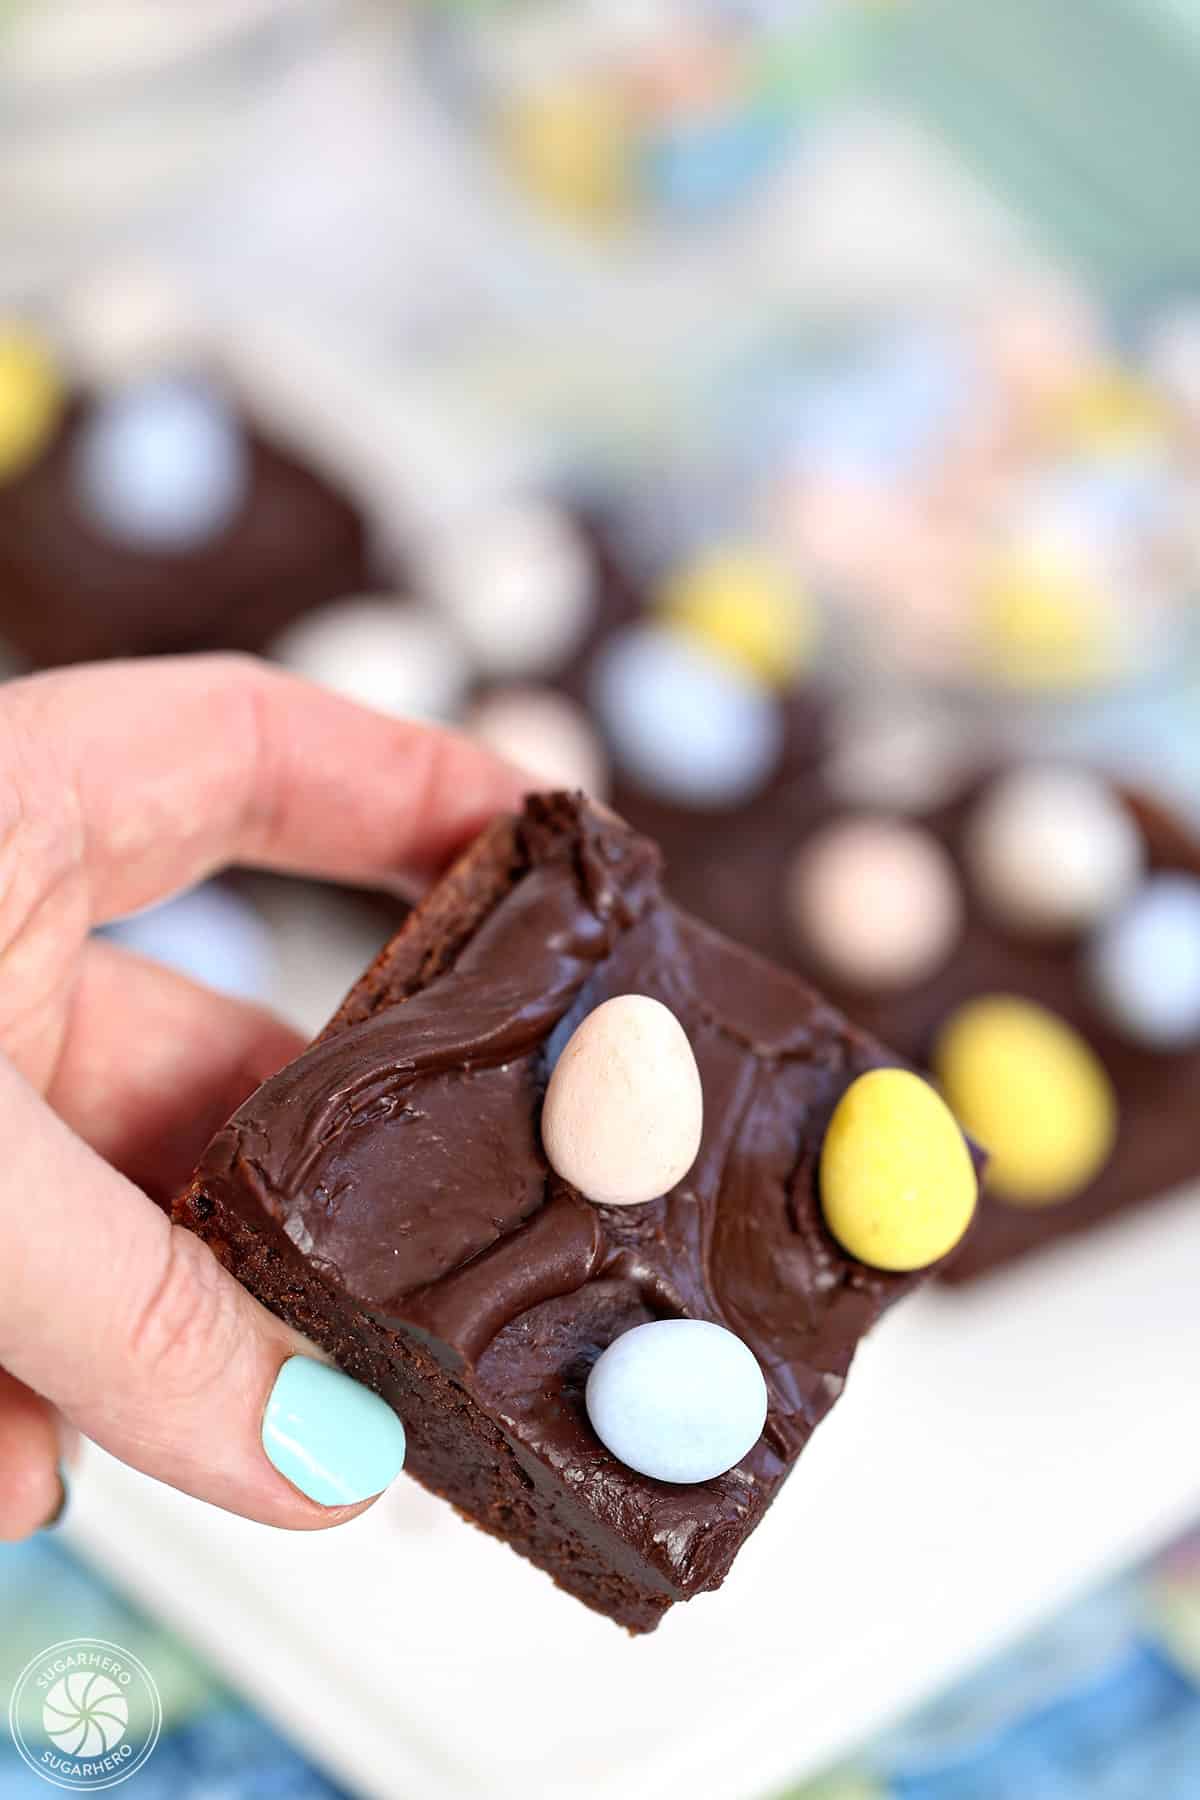 Hand holding up a brownie with chocolate frosting and chocolate eggs on top.